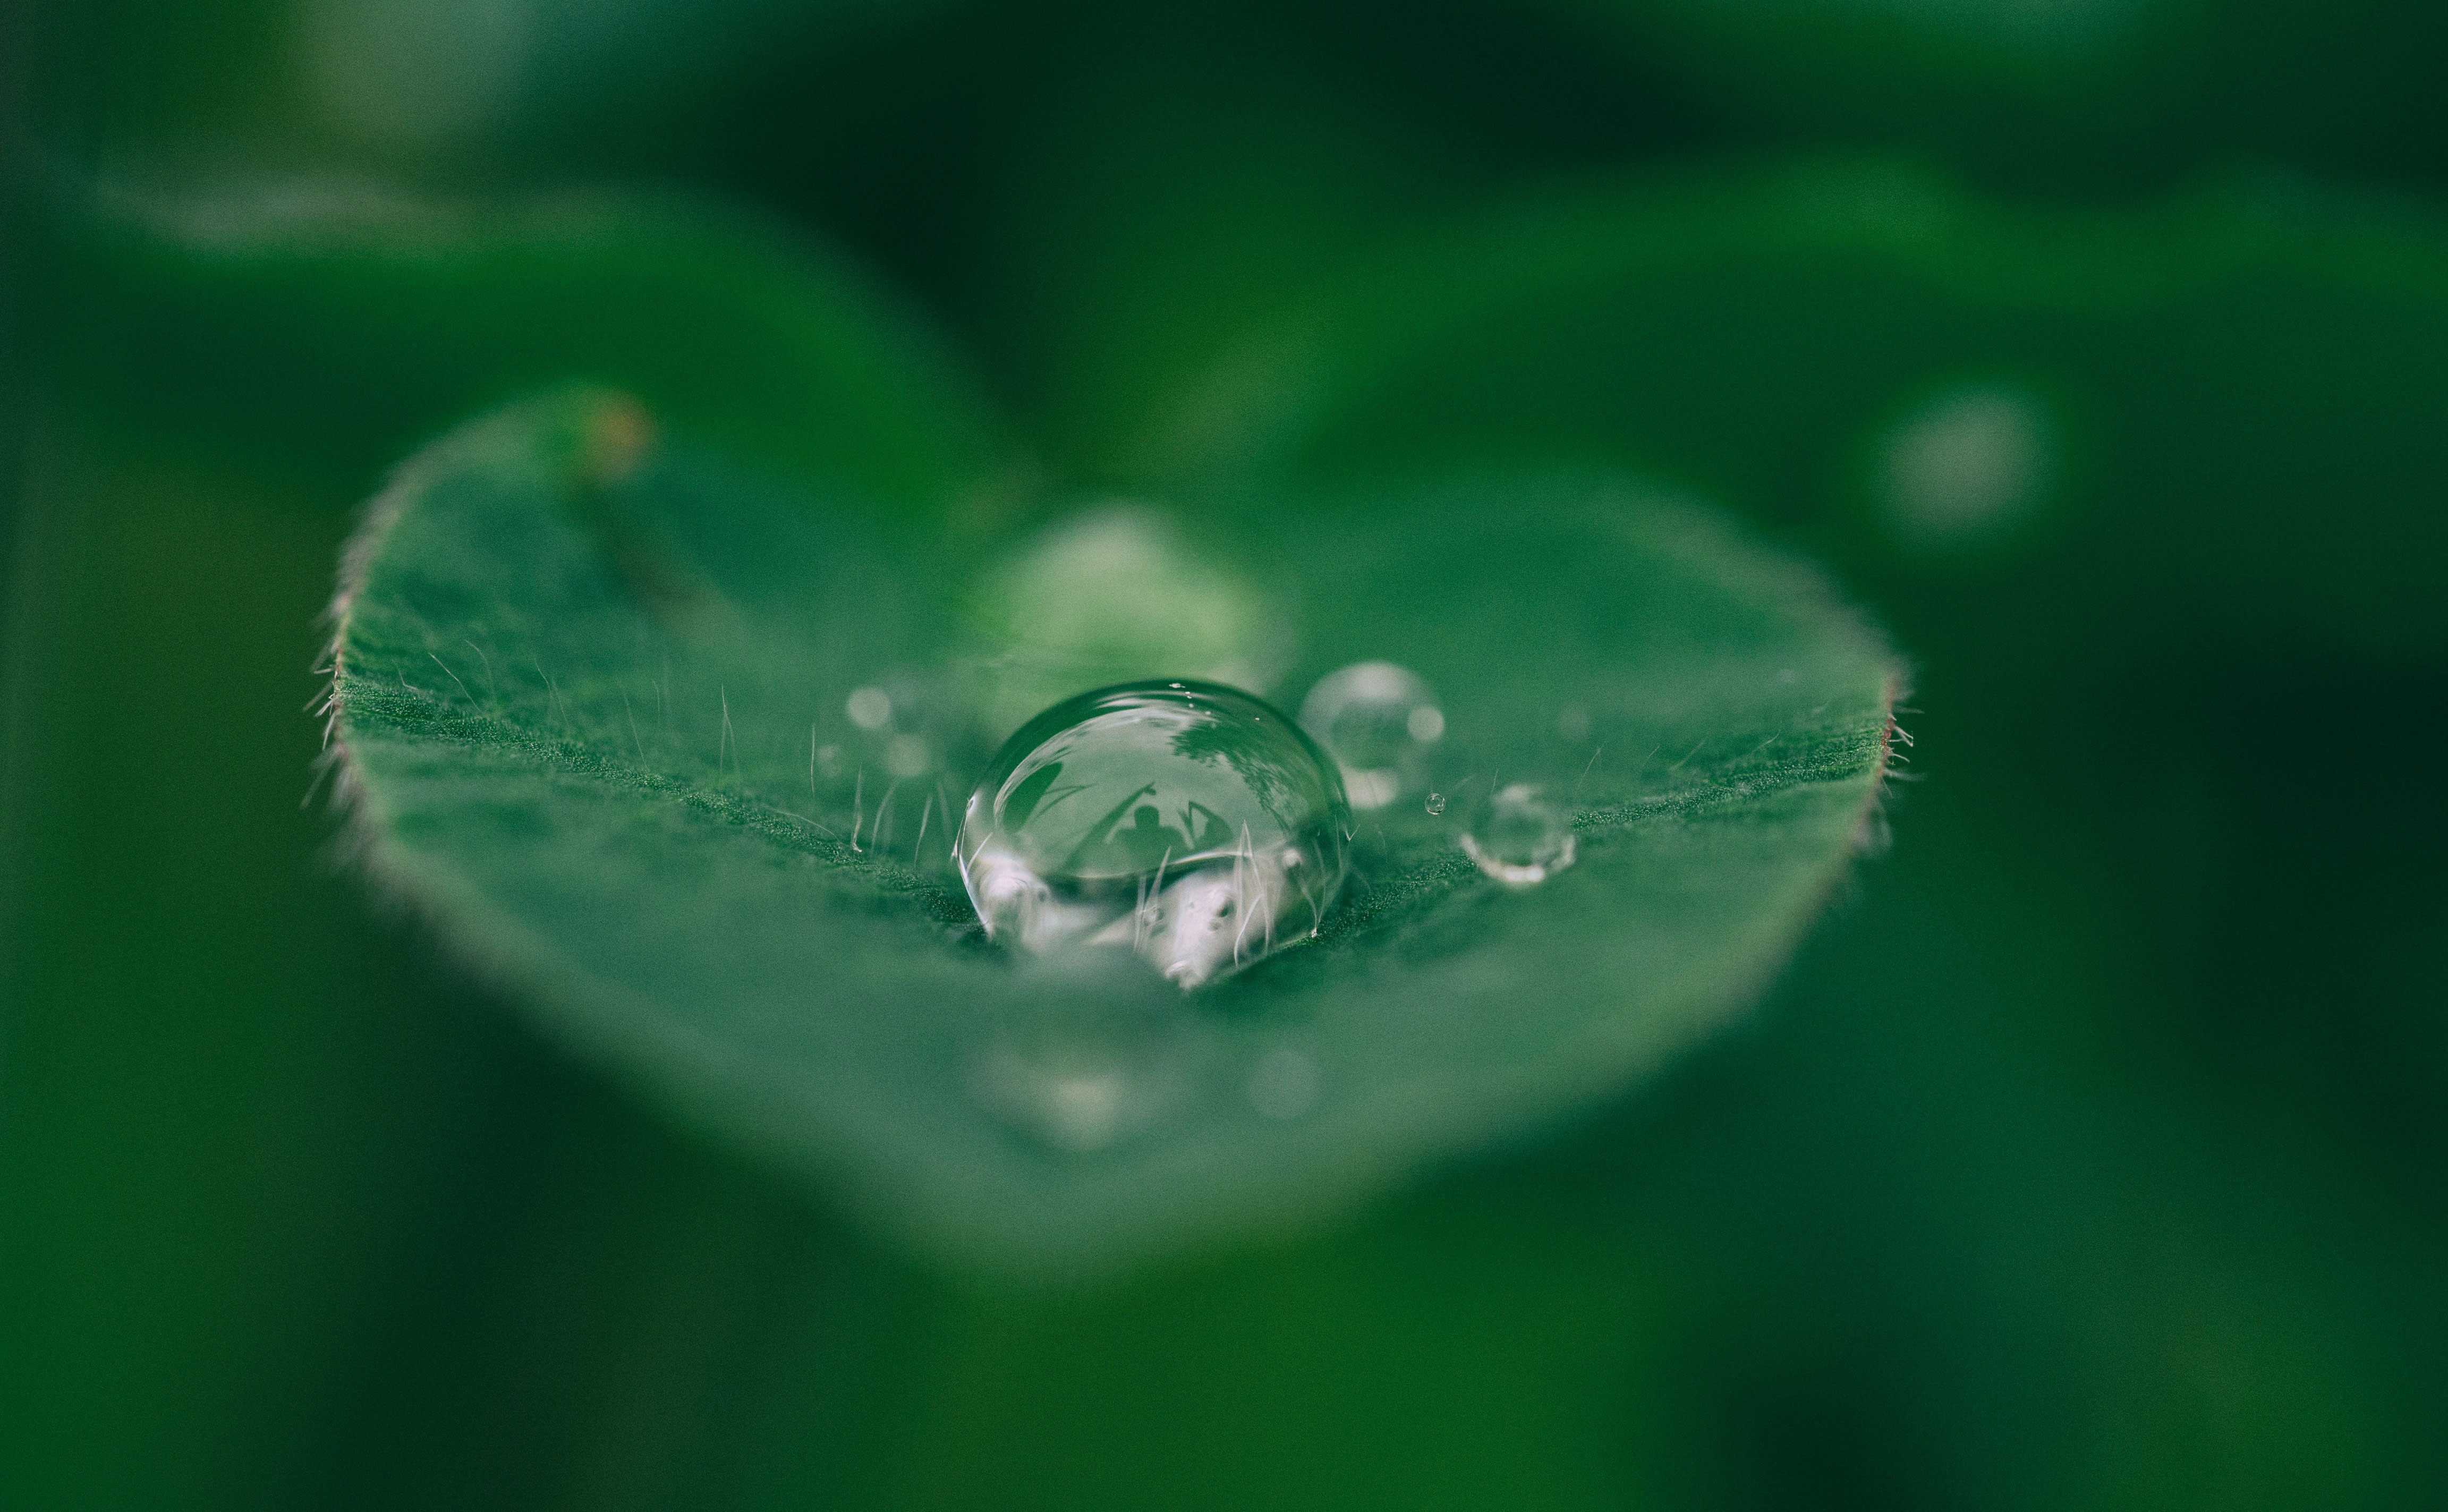 Plant with water droplets